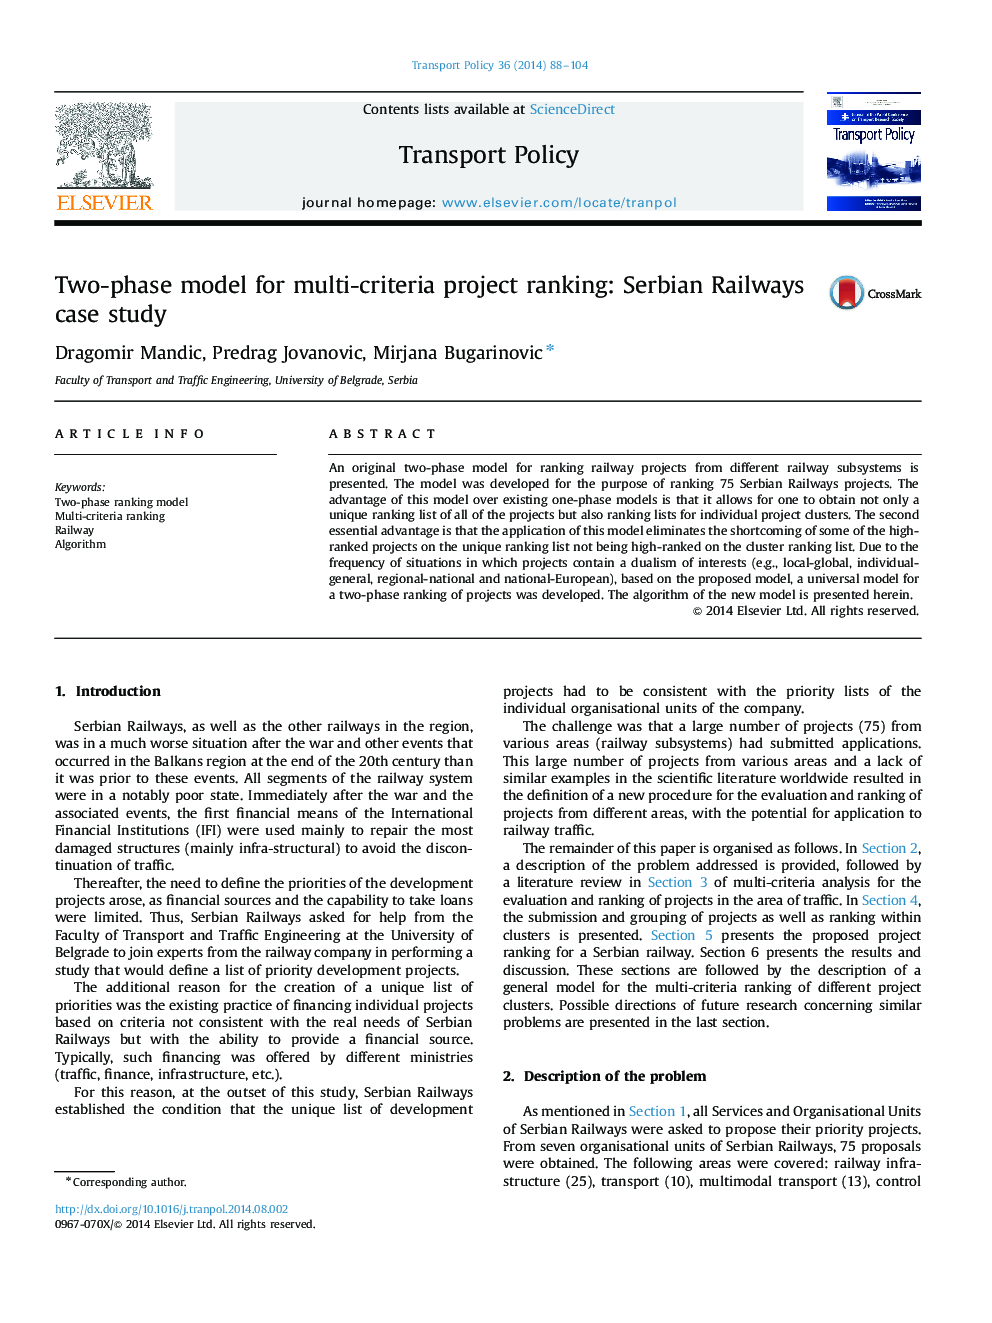 Two-phase model for multi-criteria project ranking: Serbian Railways case study